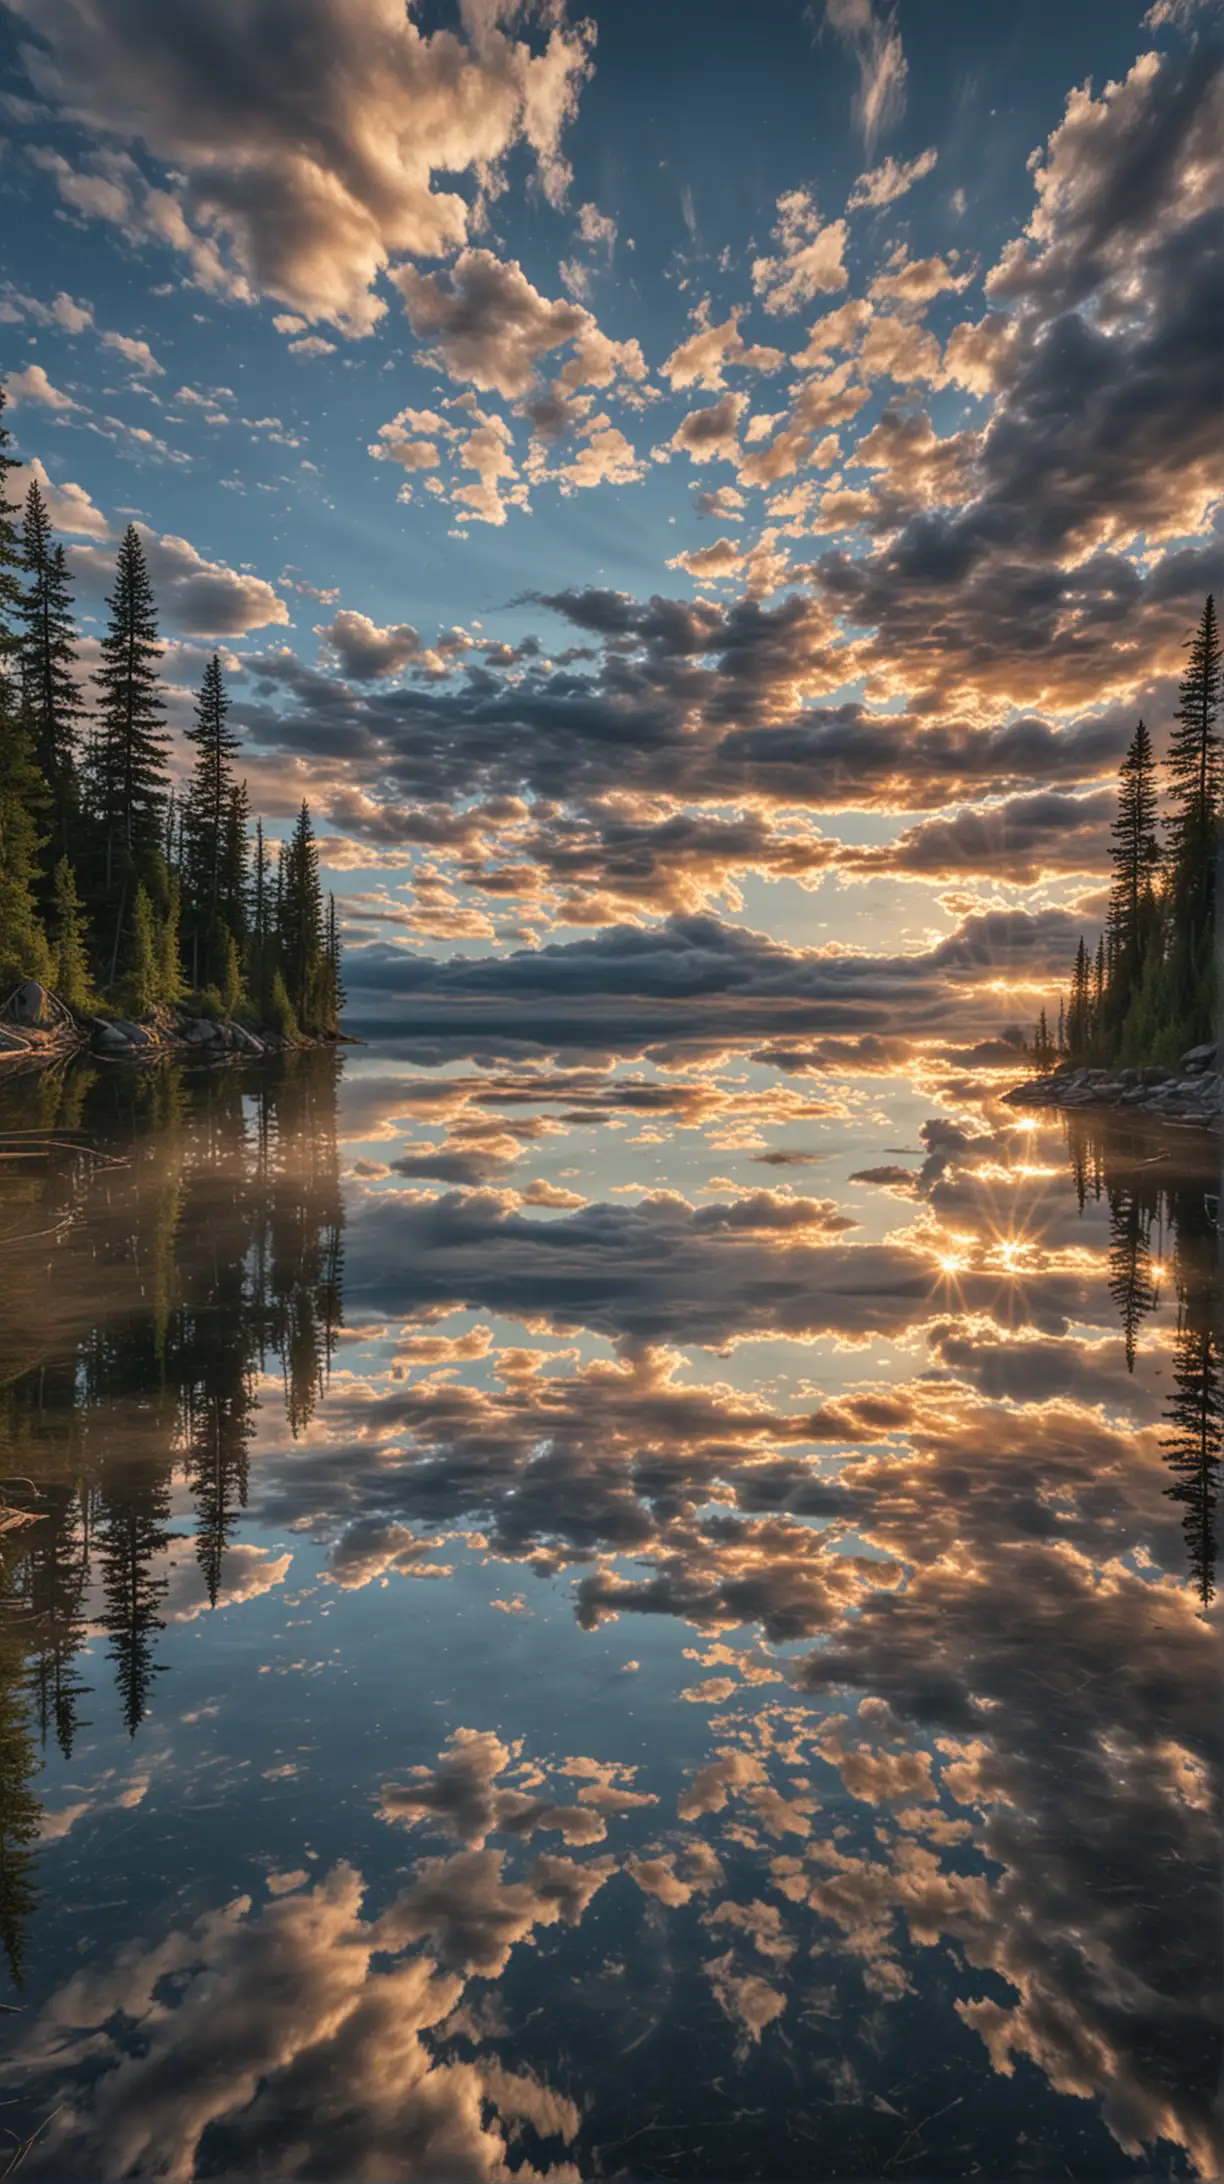 Stunning 4K Photo of Sky Reflection in a Serene Canadian Lake